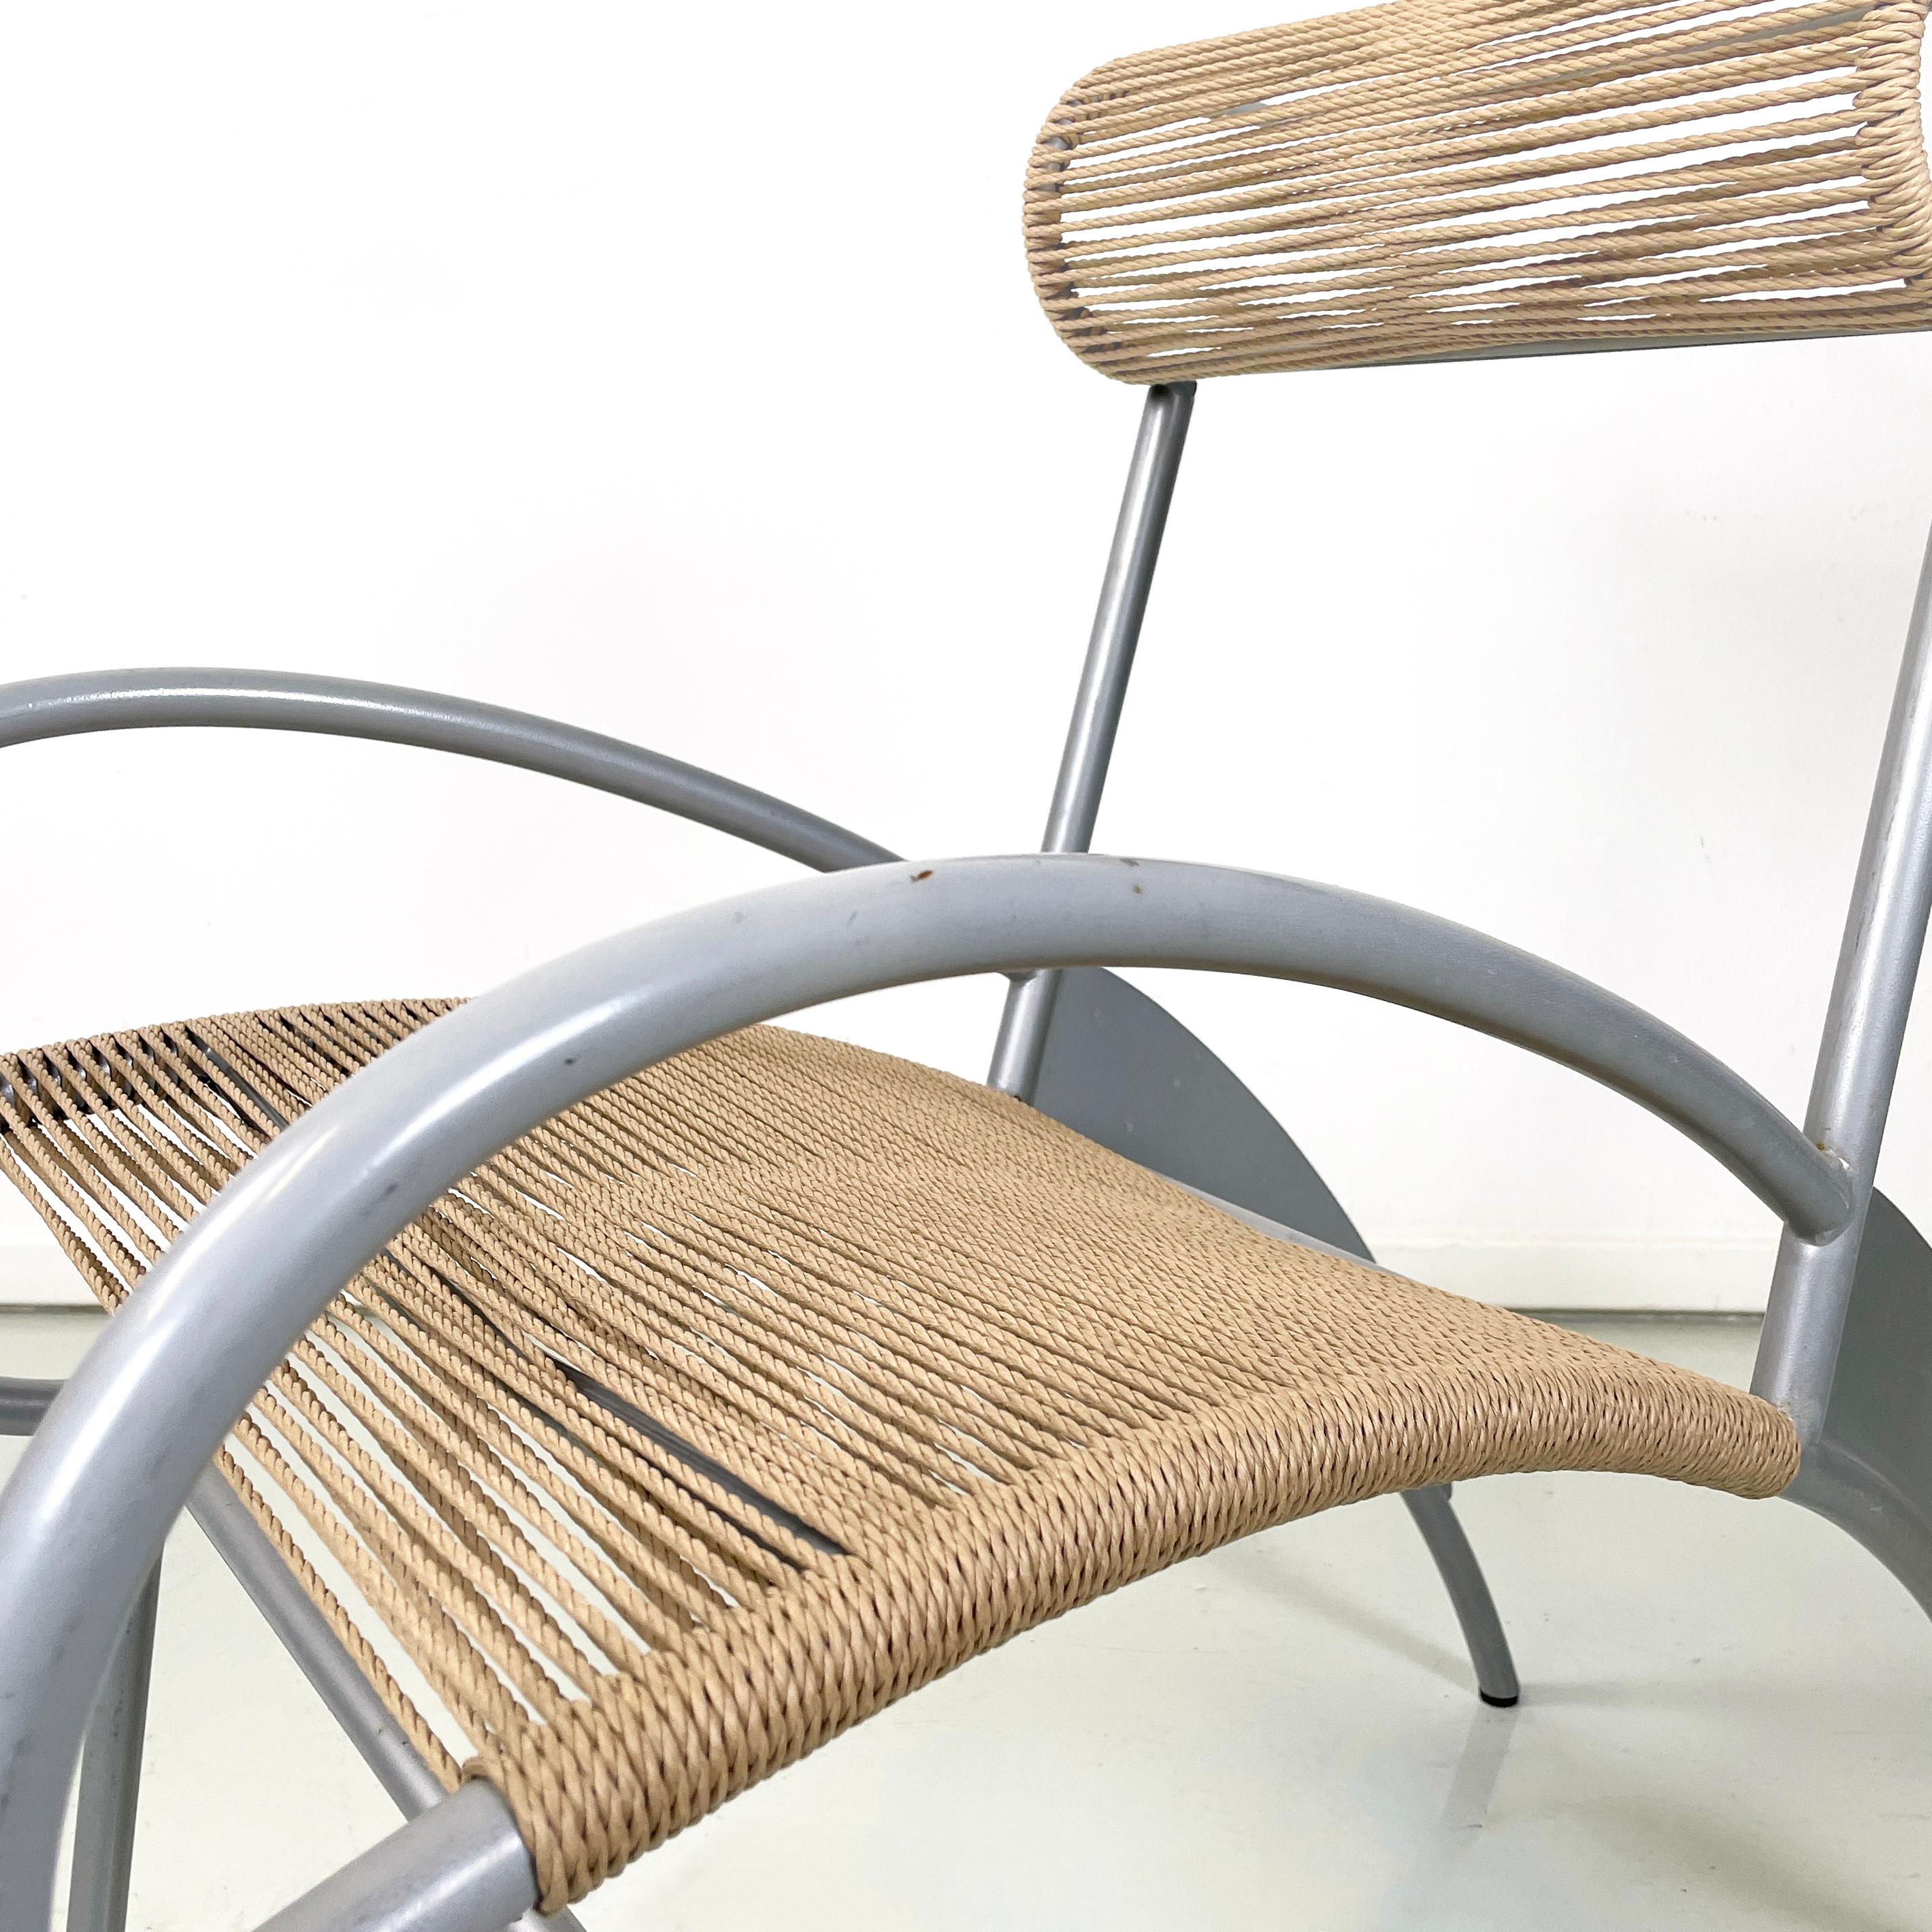 Italian modern rope and gray steel chair Juliette by Massimo Iosa-Ghini, 1990s For Sale 1